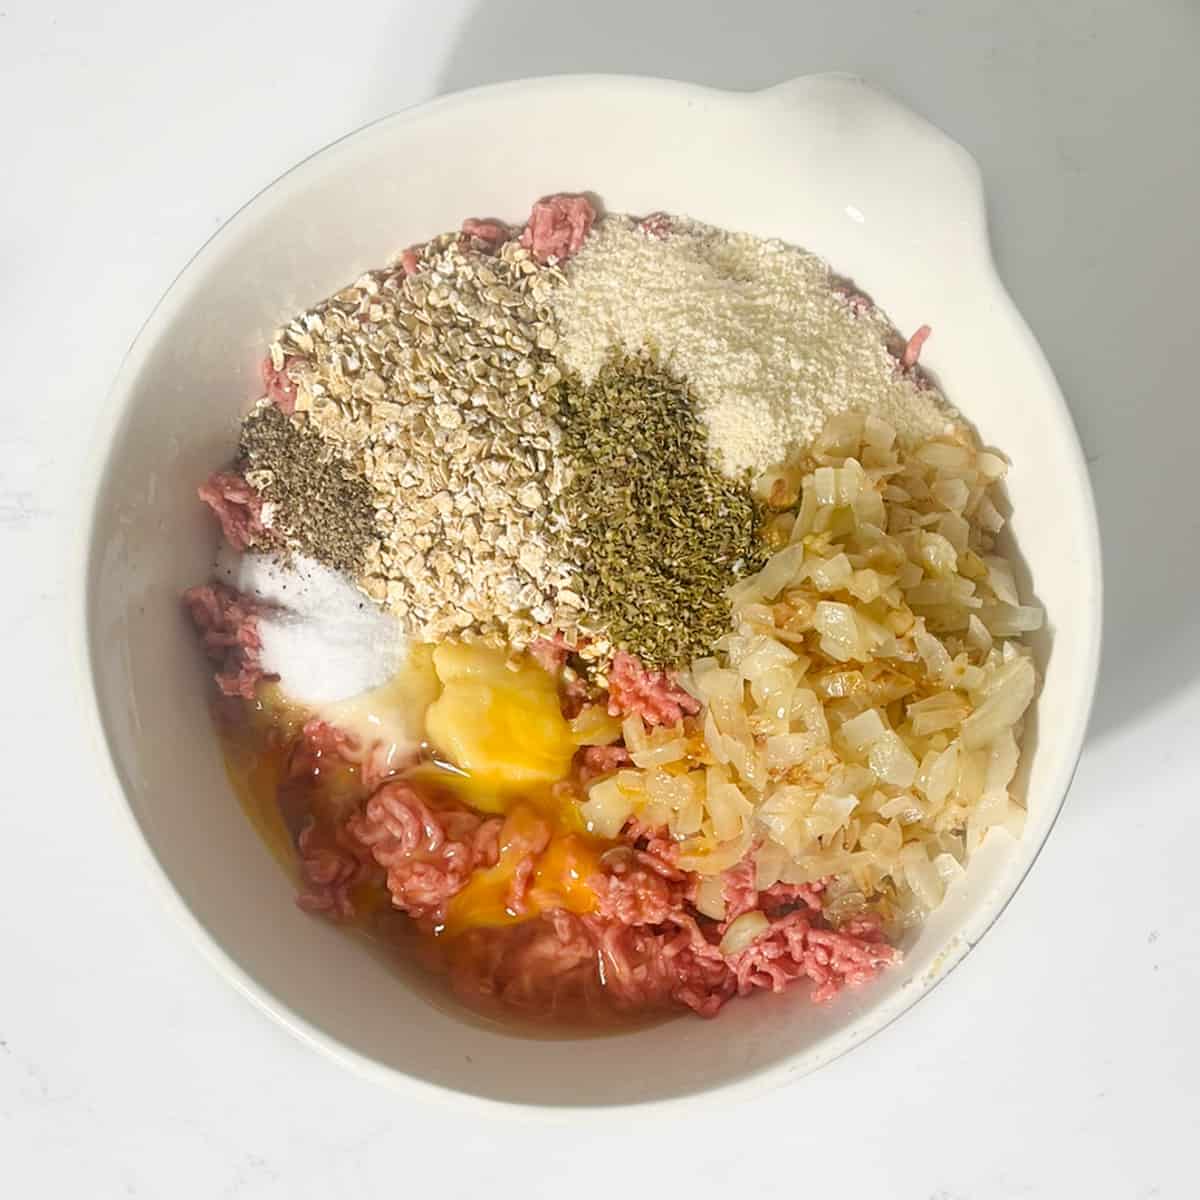 The spices and the oats added to the mince in a large white bowl.